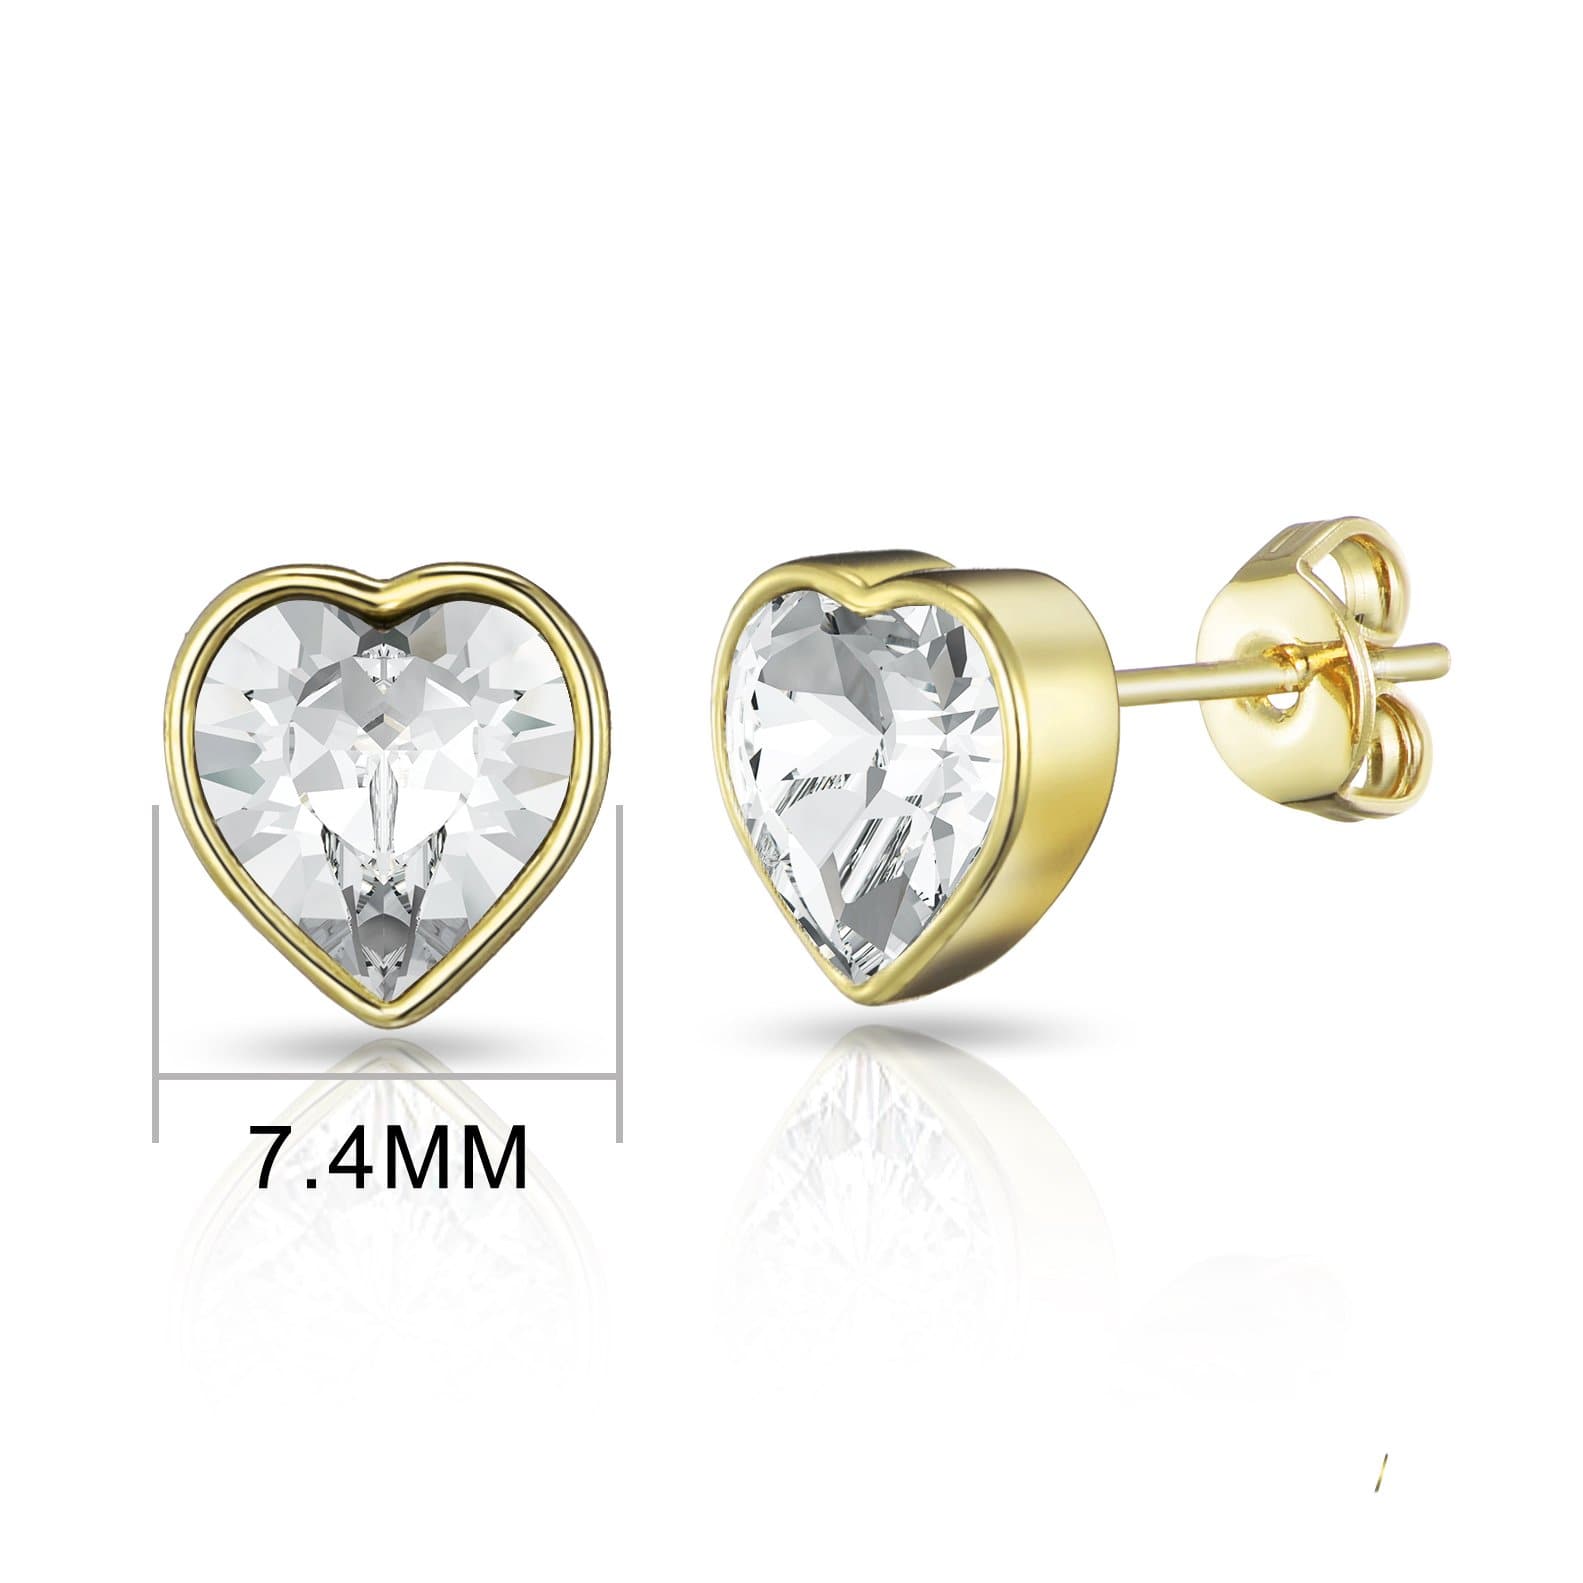 Gold Plated Bezel set Heart Earrings Created with Zircondia® Crystals